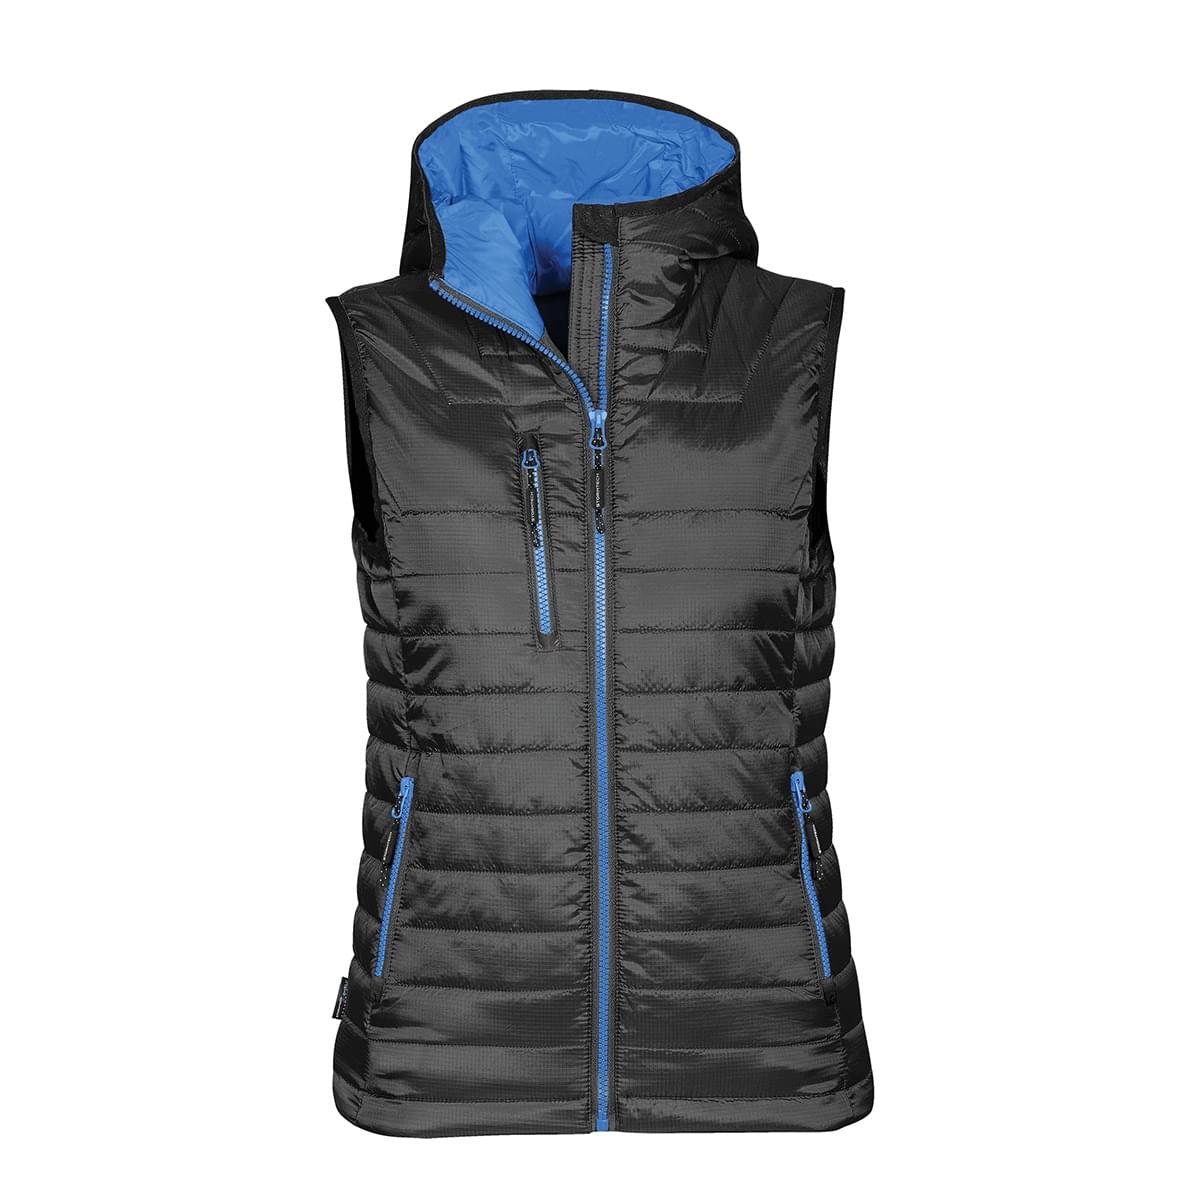 Women's Time Team Stormtech Thermal Gilet Body Warmer - Navy/Charcoal